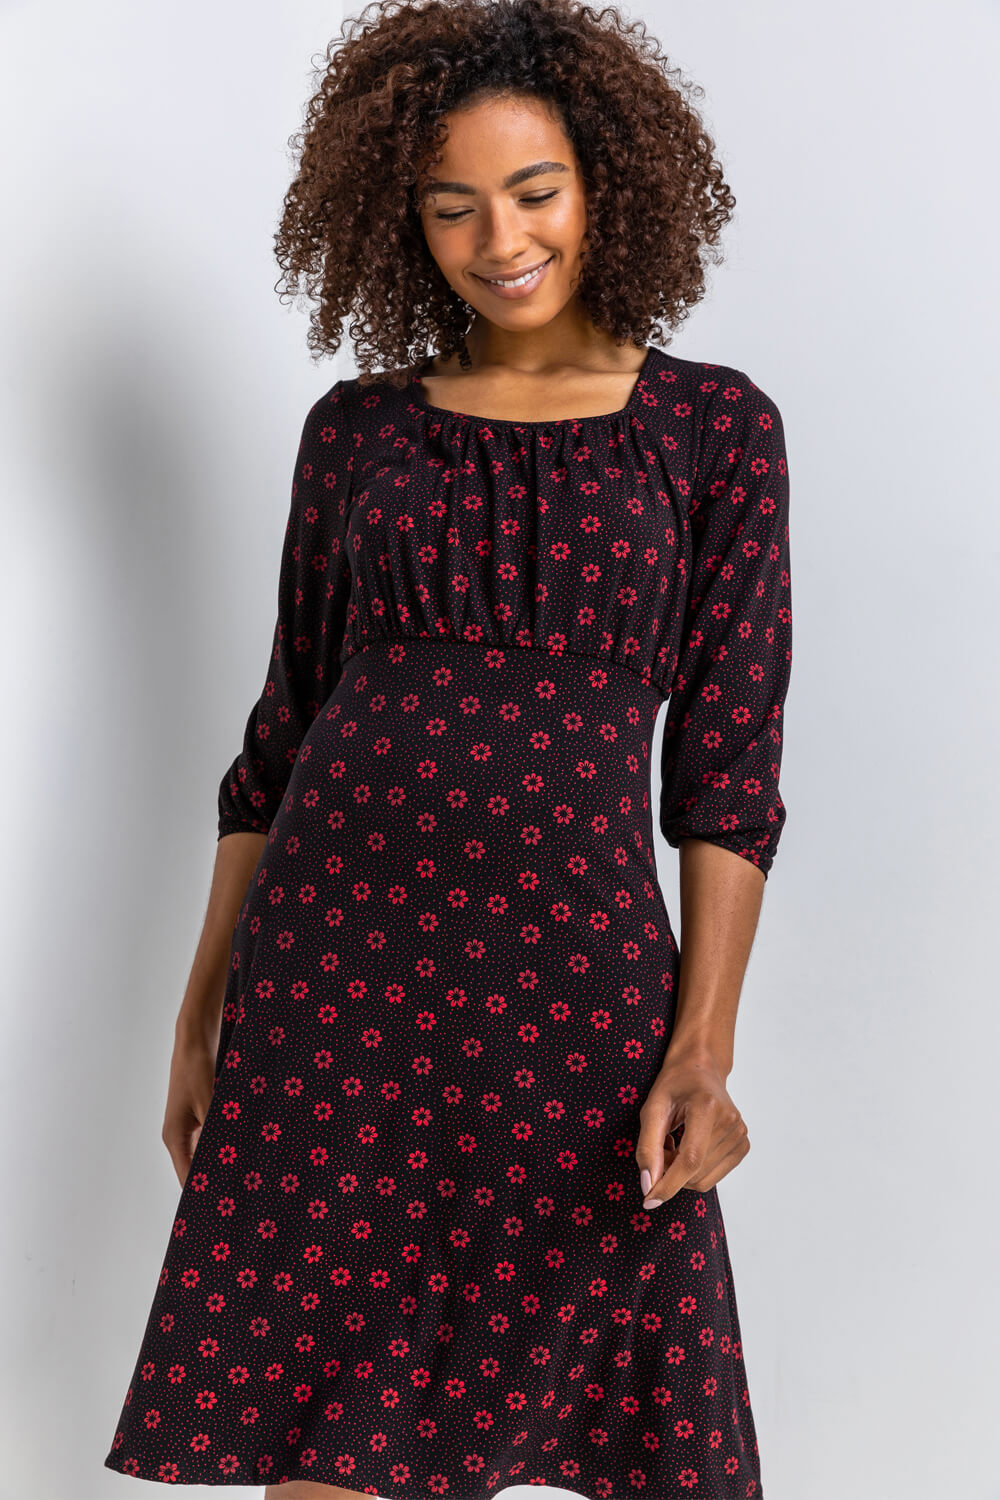 Red Square Neck Floral Spot Print Dress, Image 3 of 5